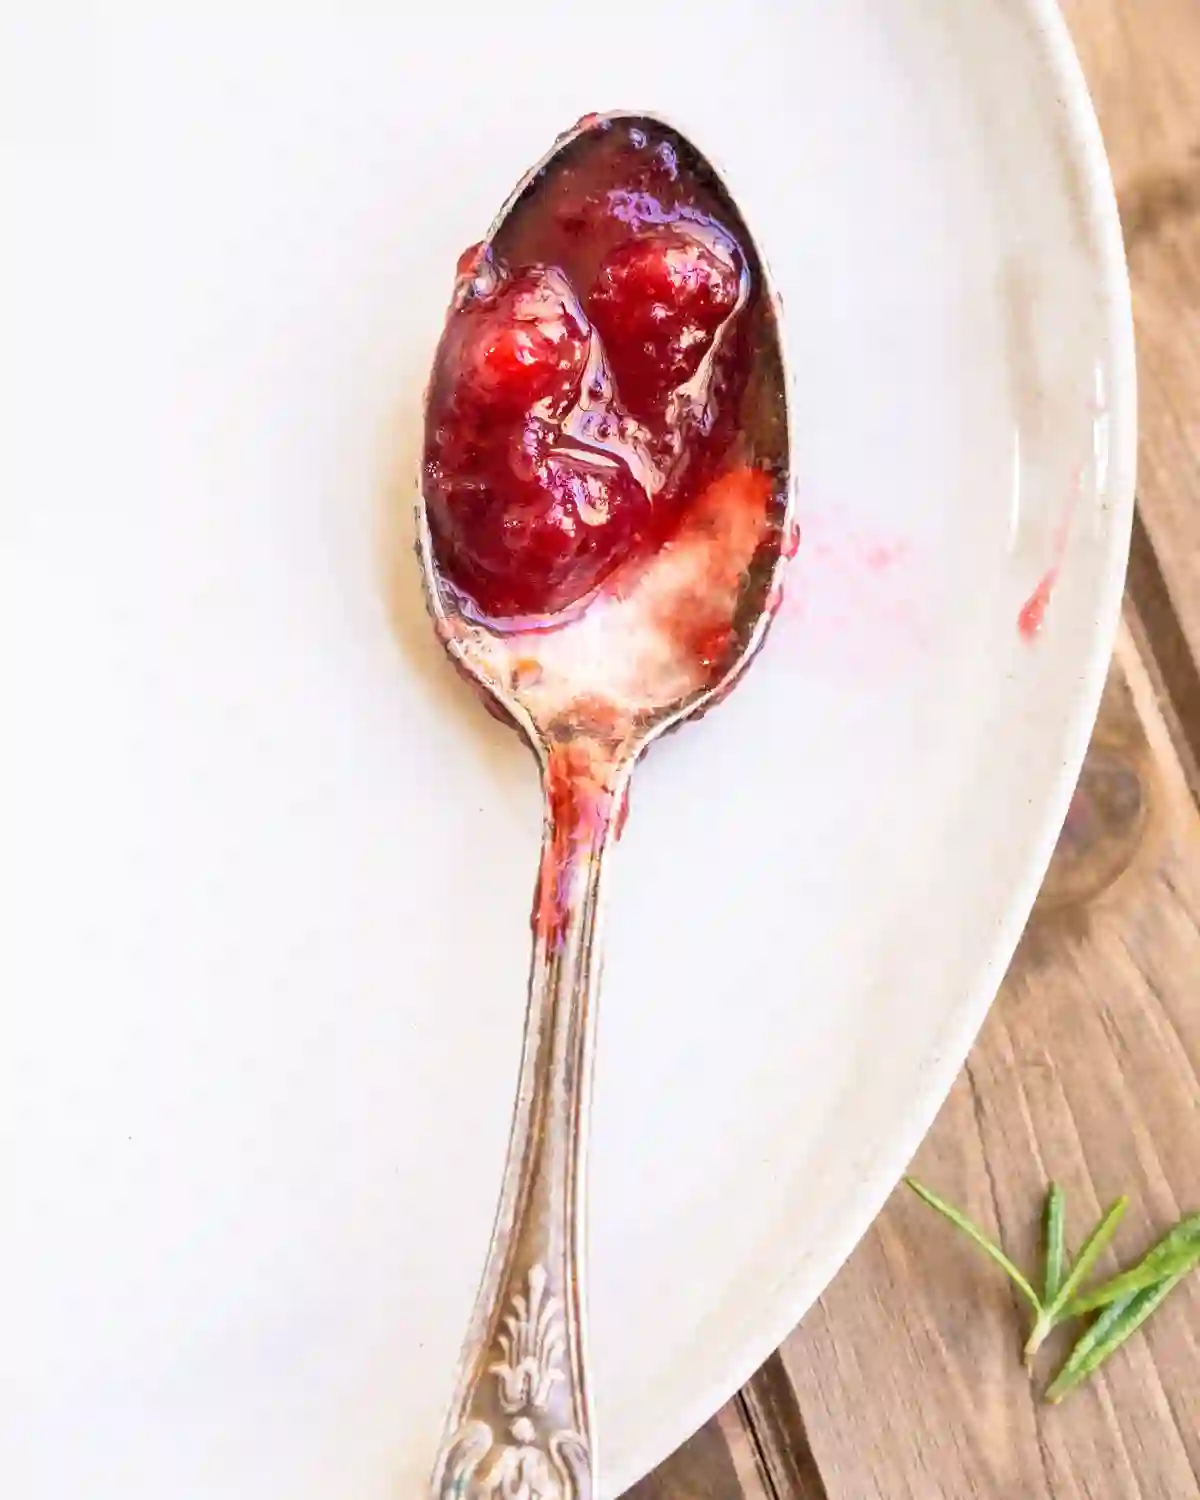 cranberry sauce on a spoon